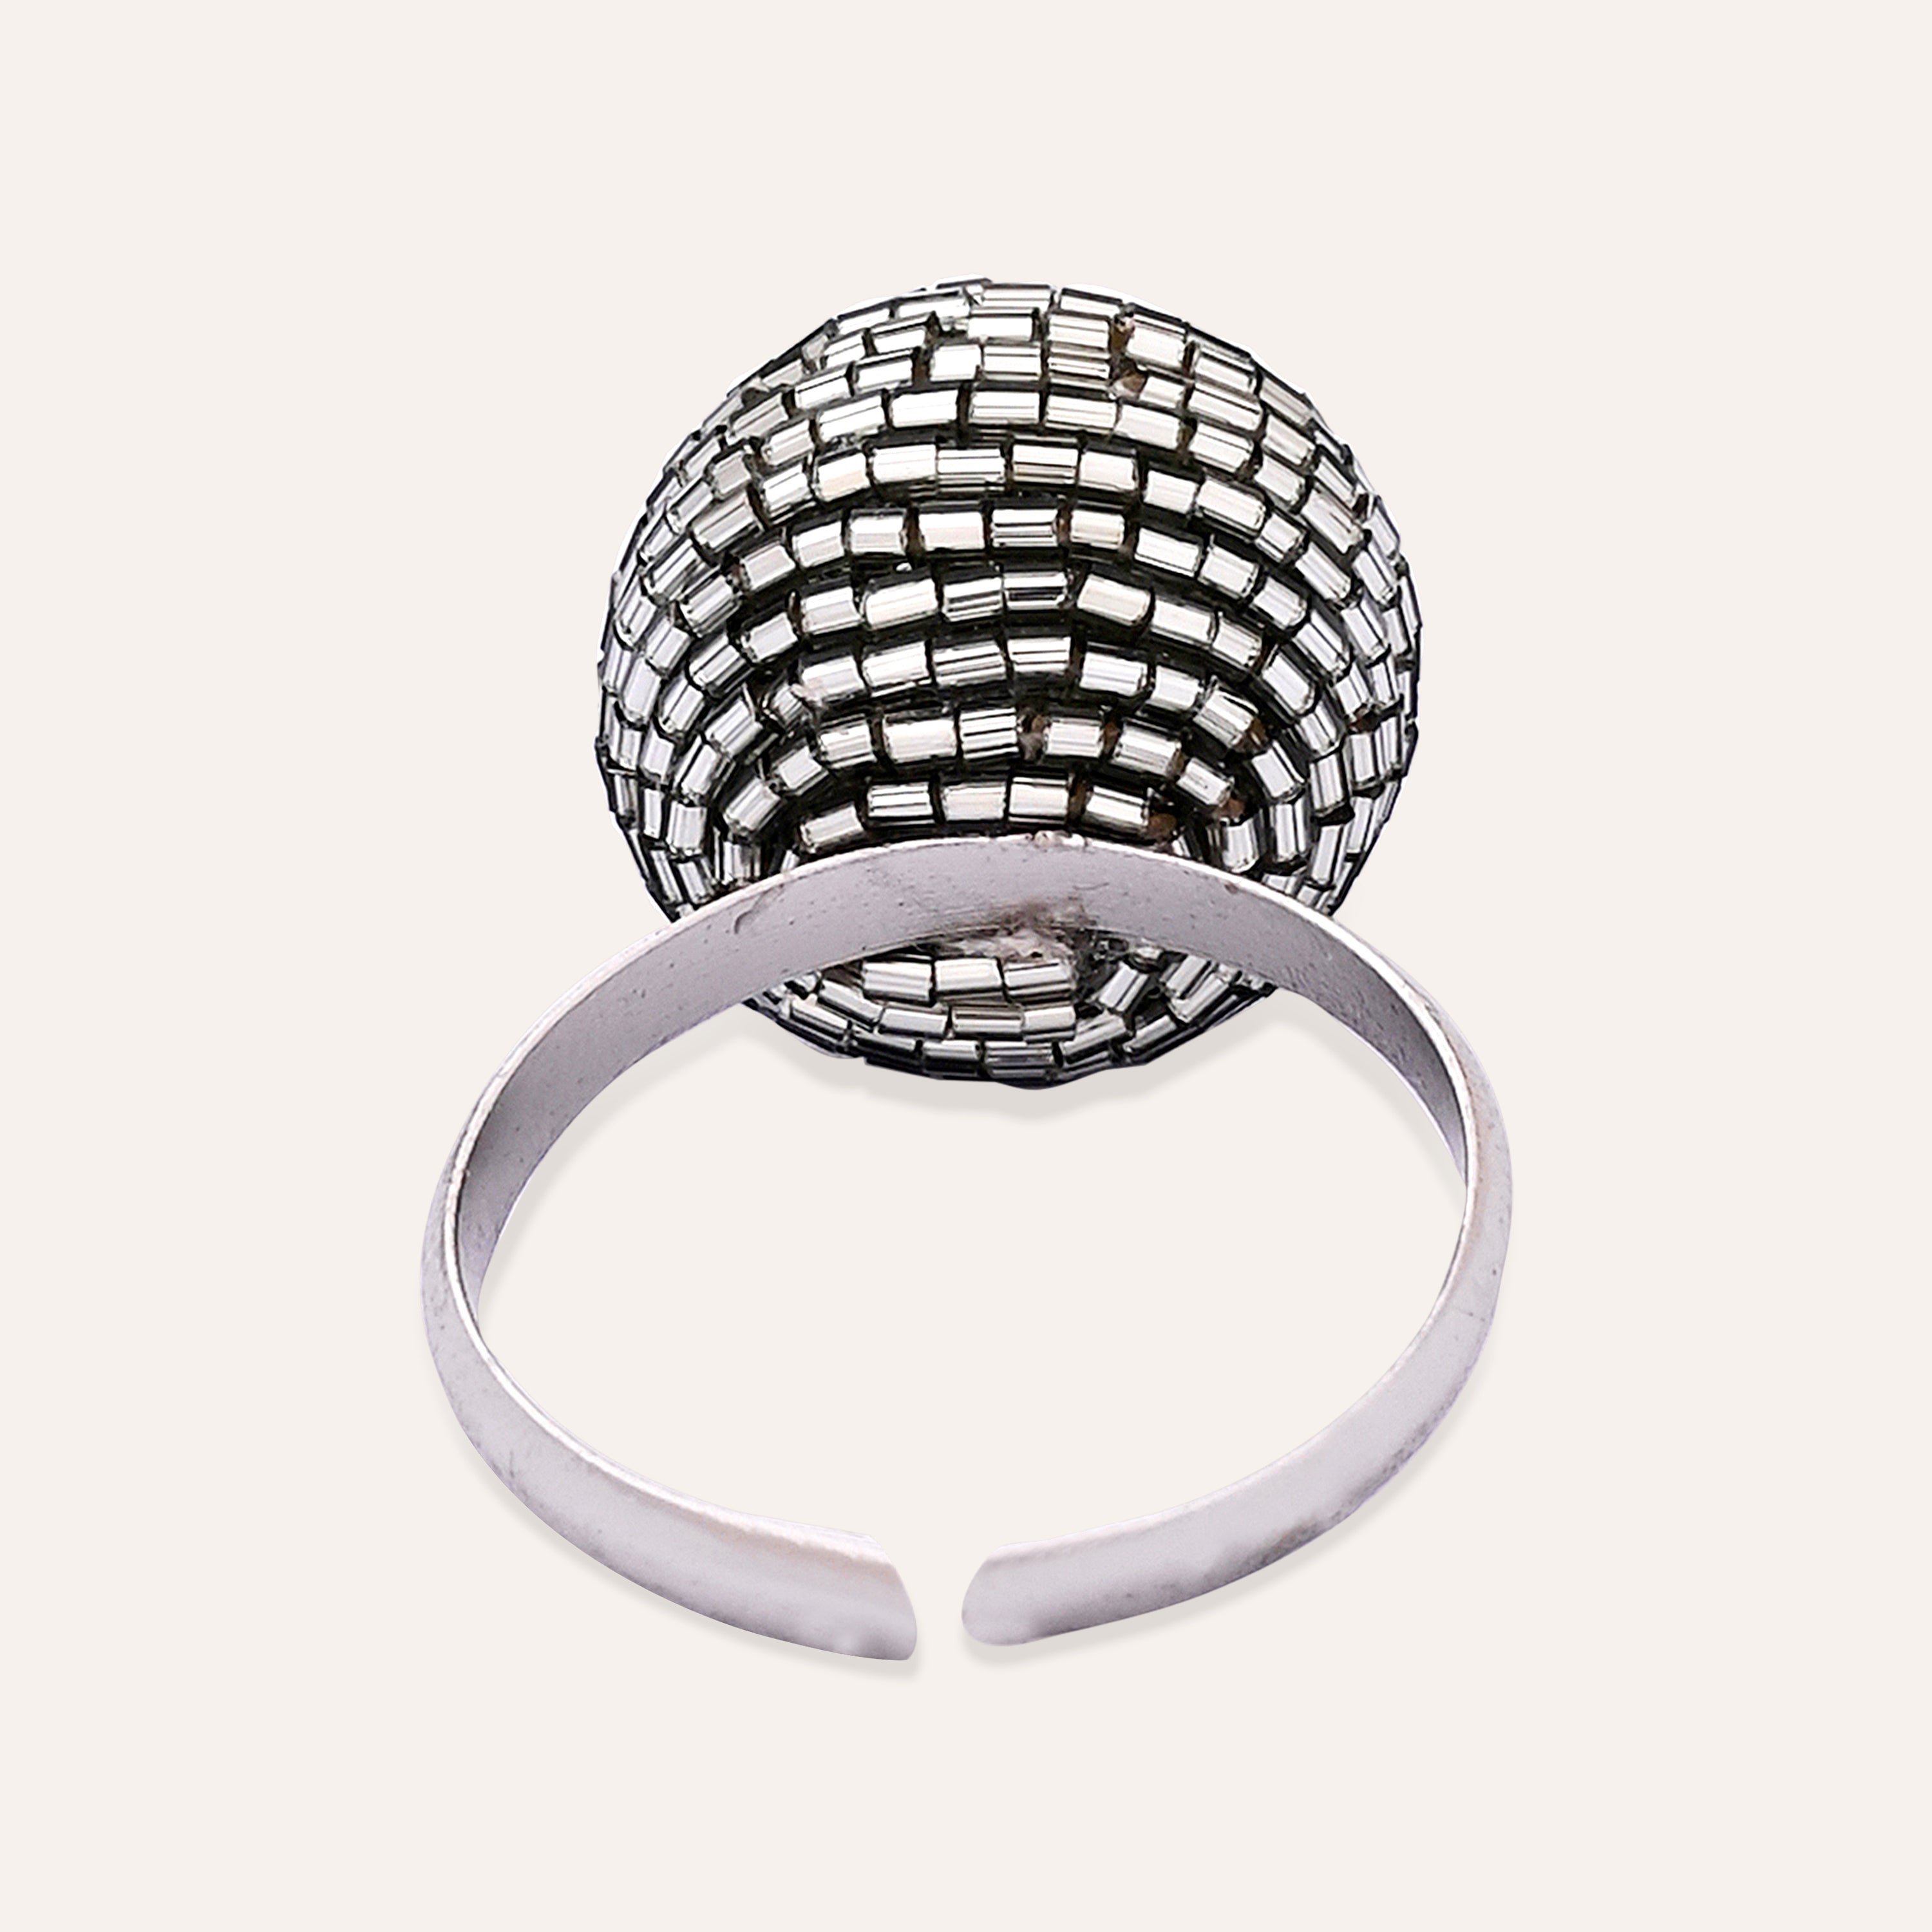 TFC Festive stunner silver statement ring- Elevate your style with our exquisite collection of gold-plated adjustable rings for women, including timeless signet rings. Explore cheapest fashion jewellery designs with anti-tarnish properties, all at The Fun Company with a touch of elegance